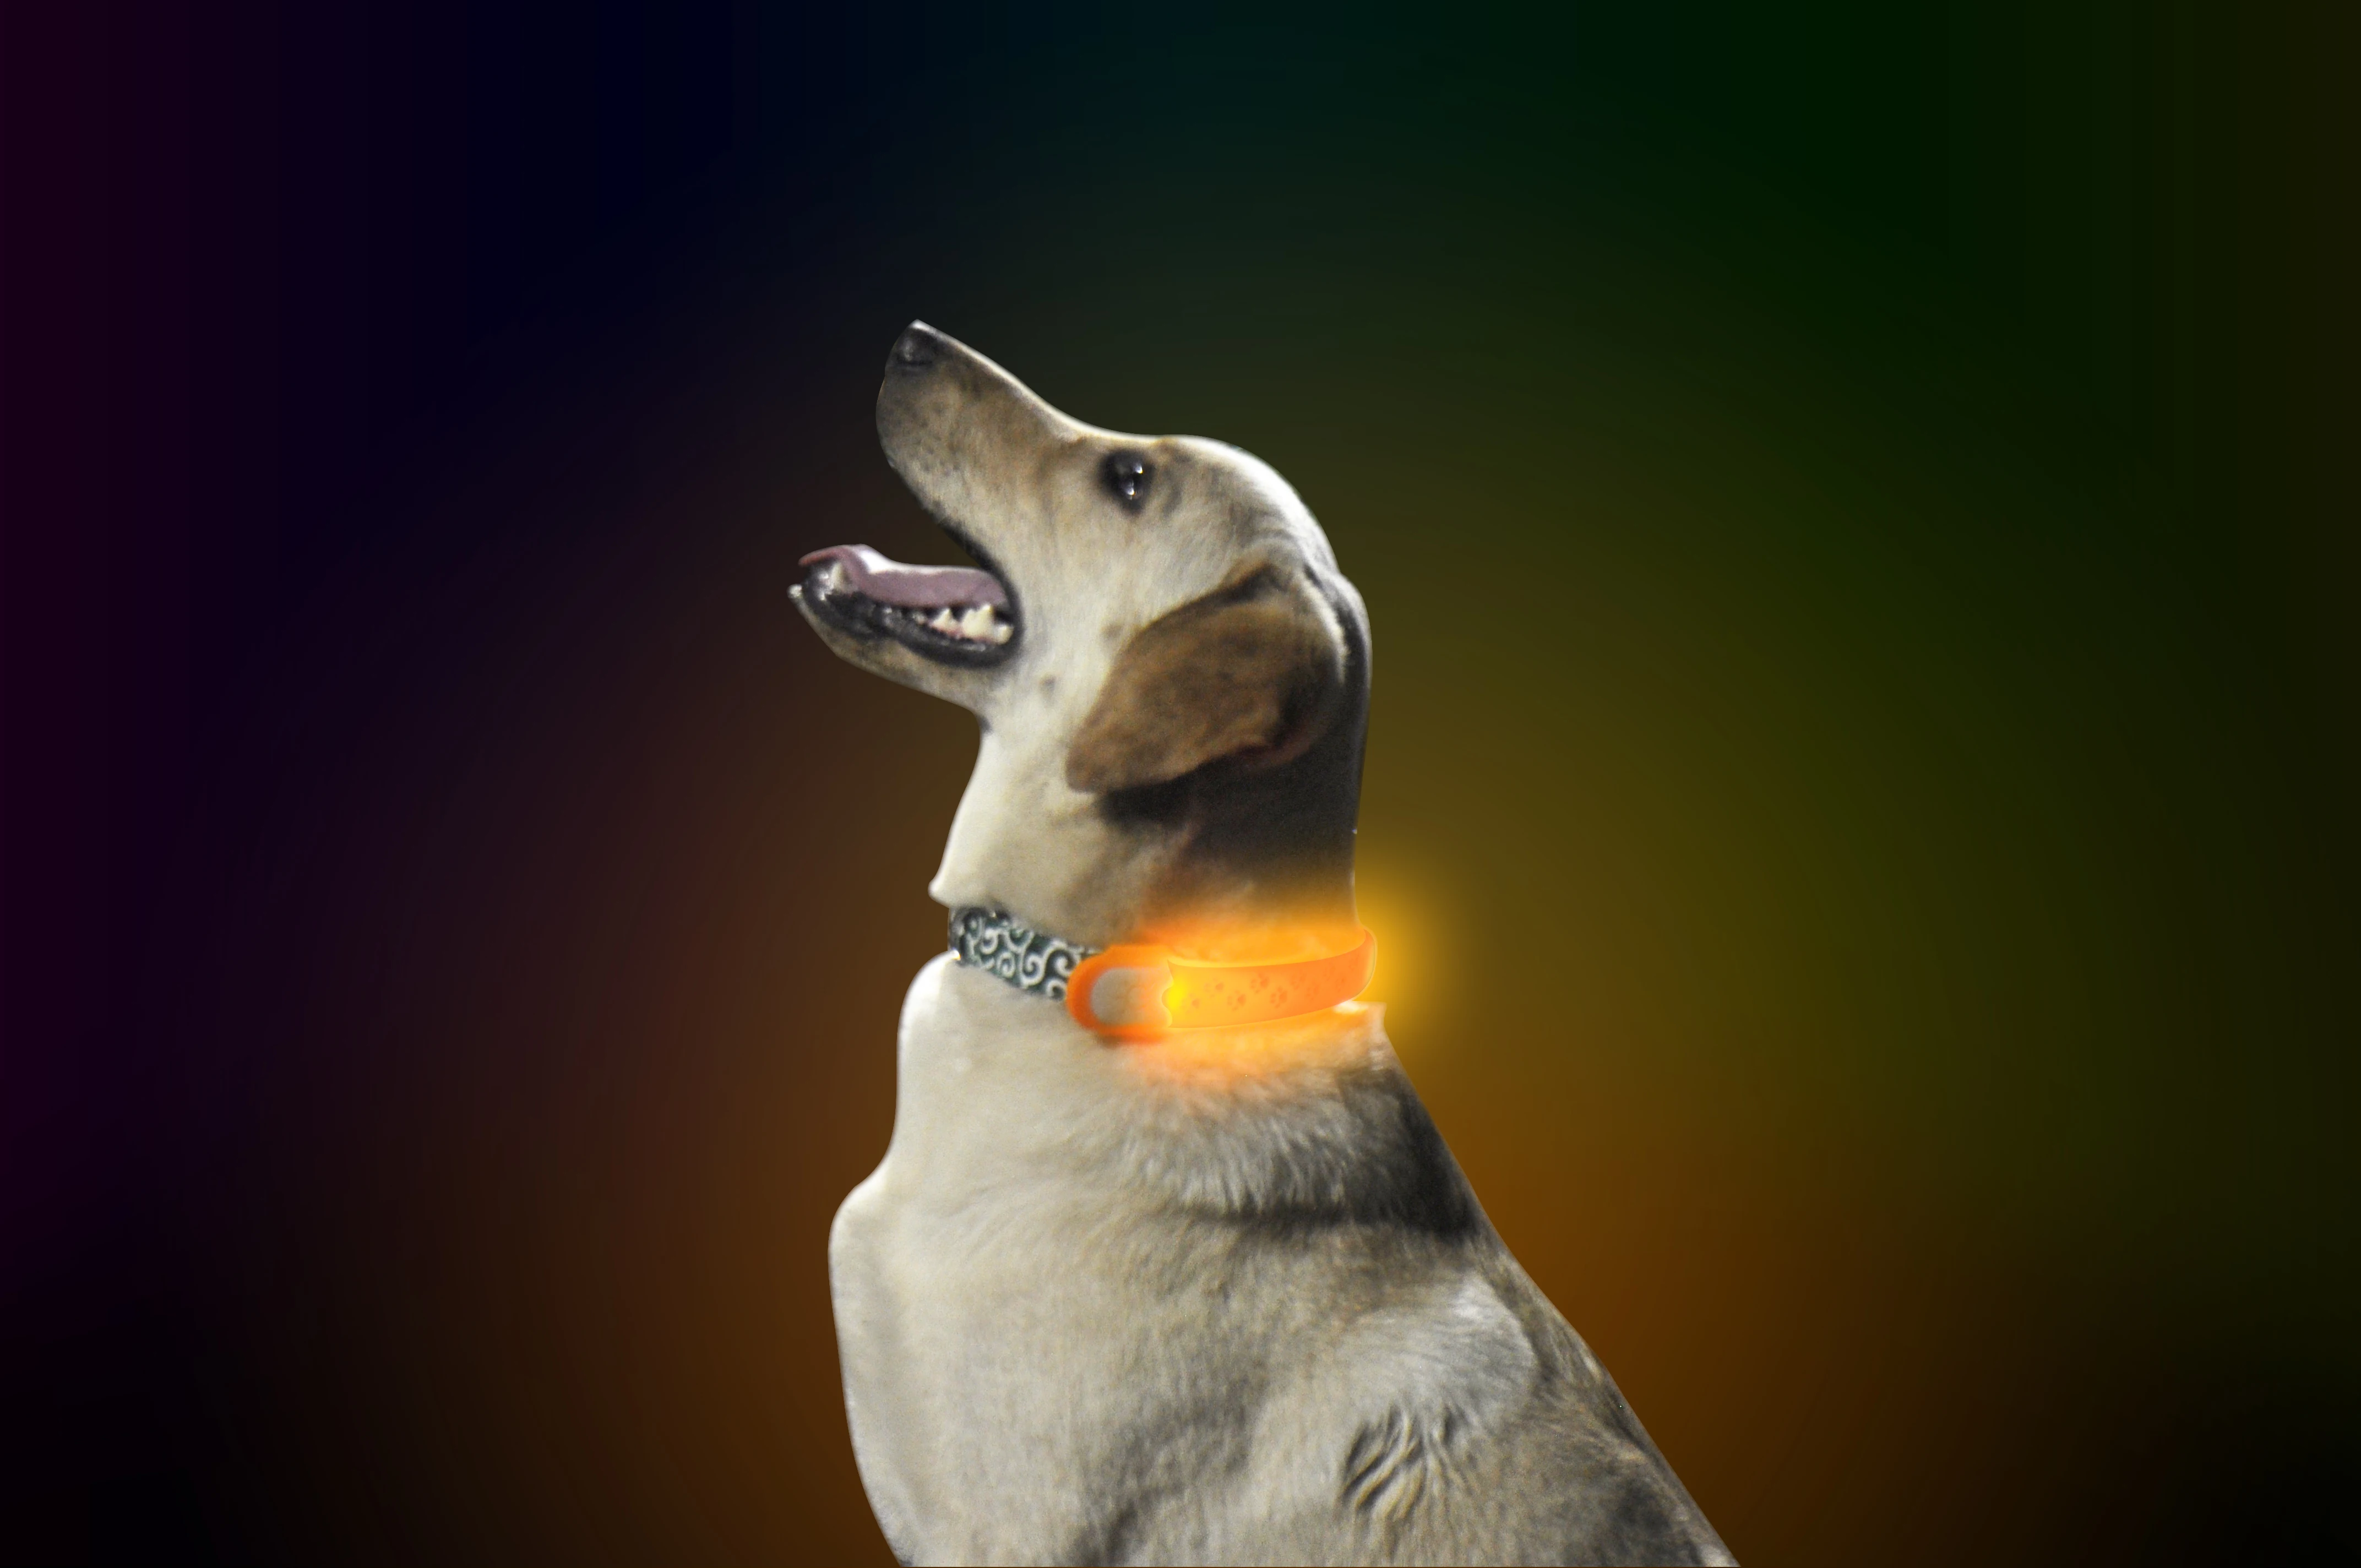 Original Led Dog Collar Cover Attach to Common Dog Collar to Get Visibility Flashing Waterproof Silicone Dog Collar Light